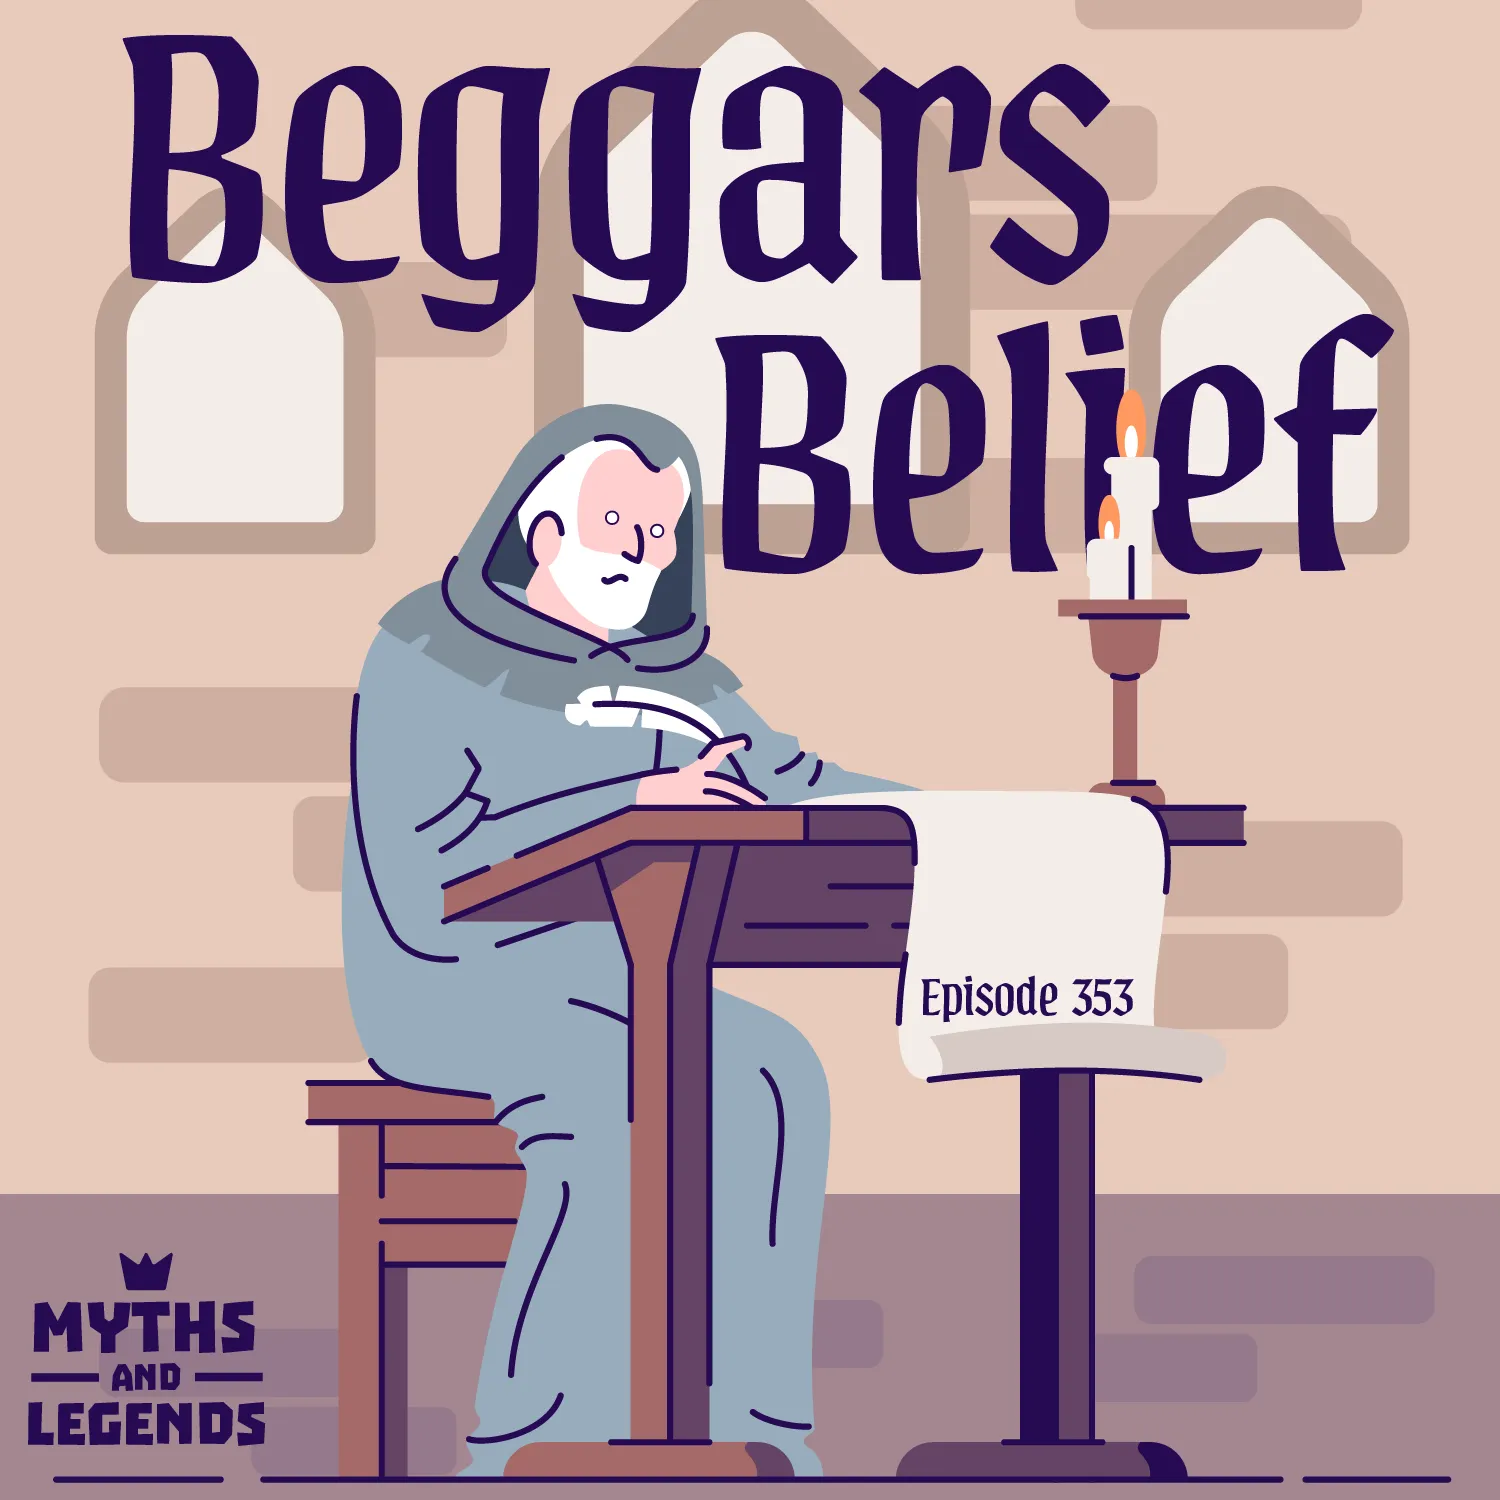 A medieval cartoon writer looks in mild shock and terror at his empty scroll. A candle burns next to him. He's in a castle. The words "Beggars Belief" are above him, "Episode 353" is on the bit of the scroll hanging off the back of the table, and all of these words are in a gothic-type font. The myths and legends logo is in the bottom left corner.